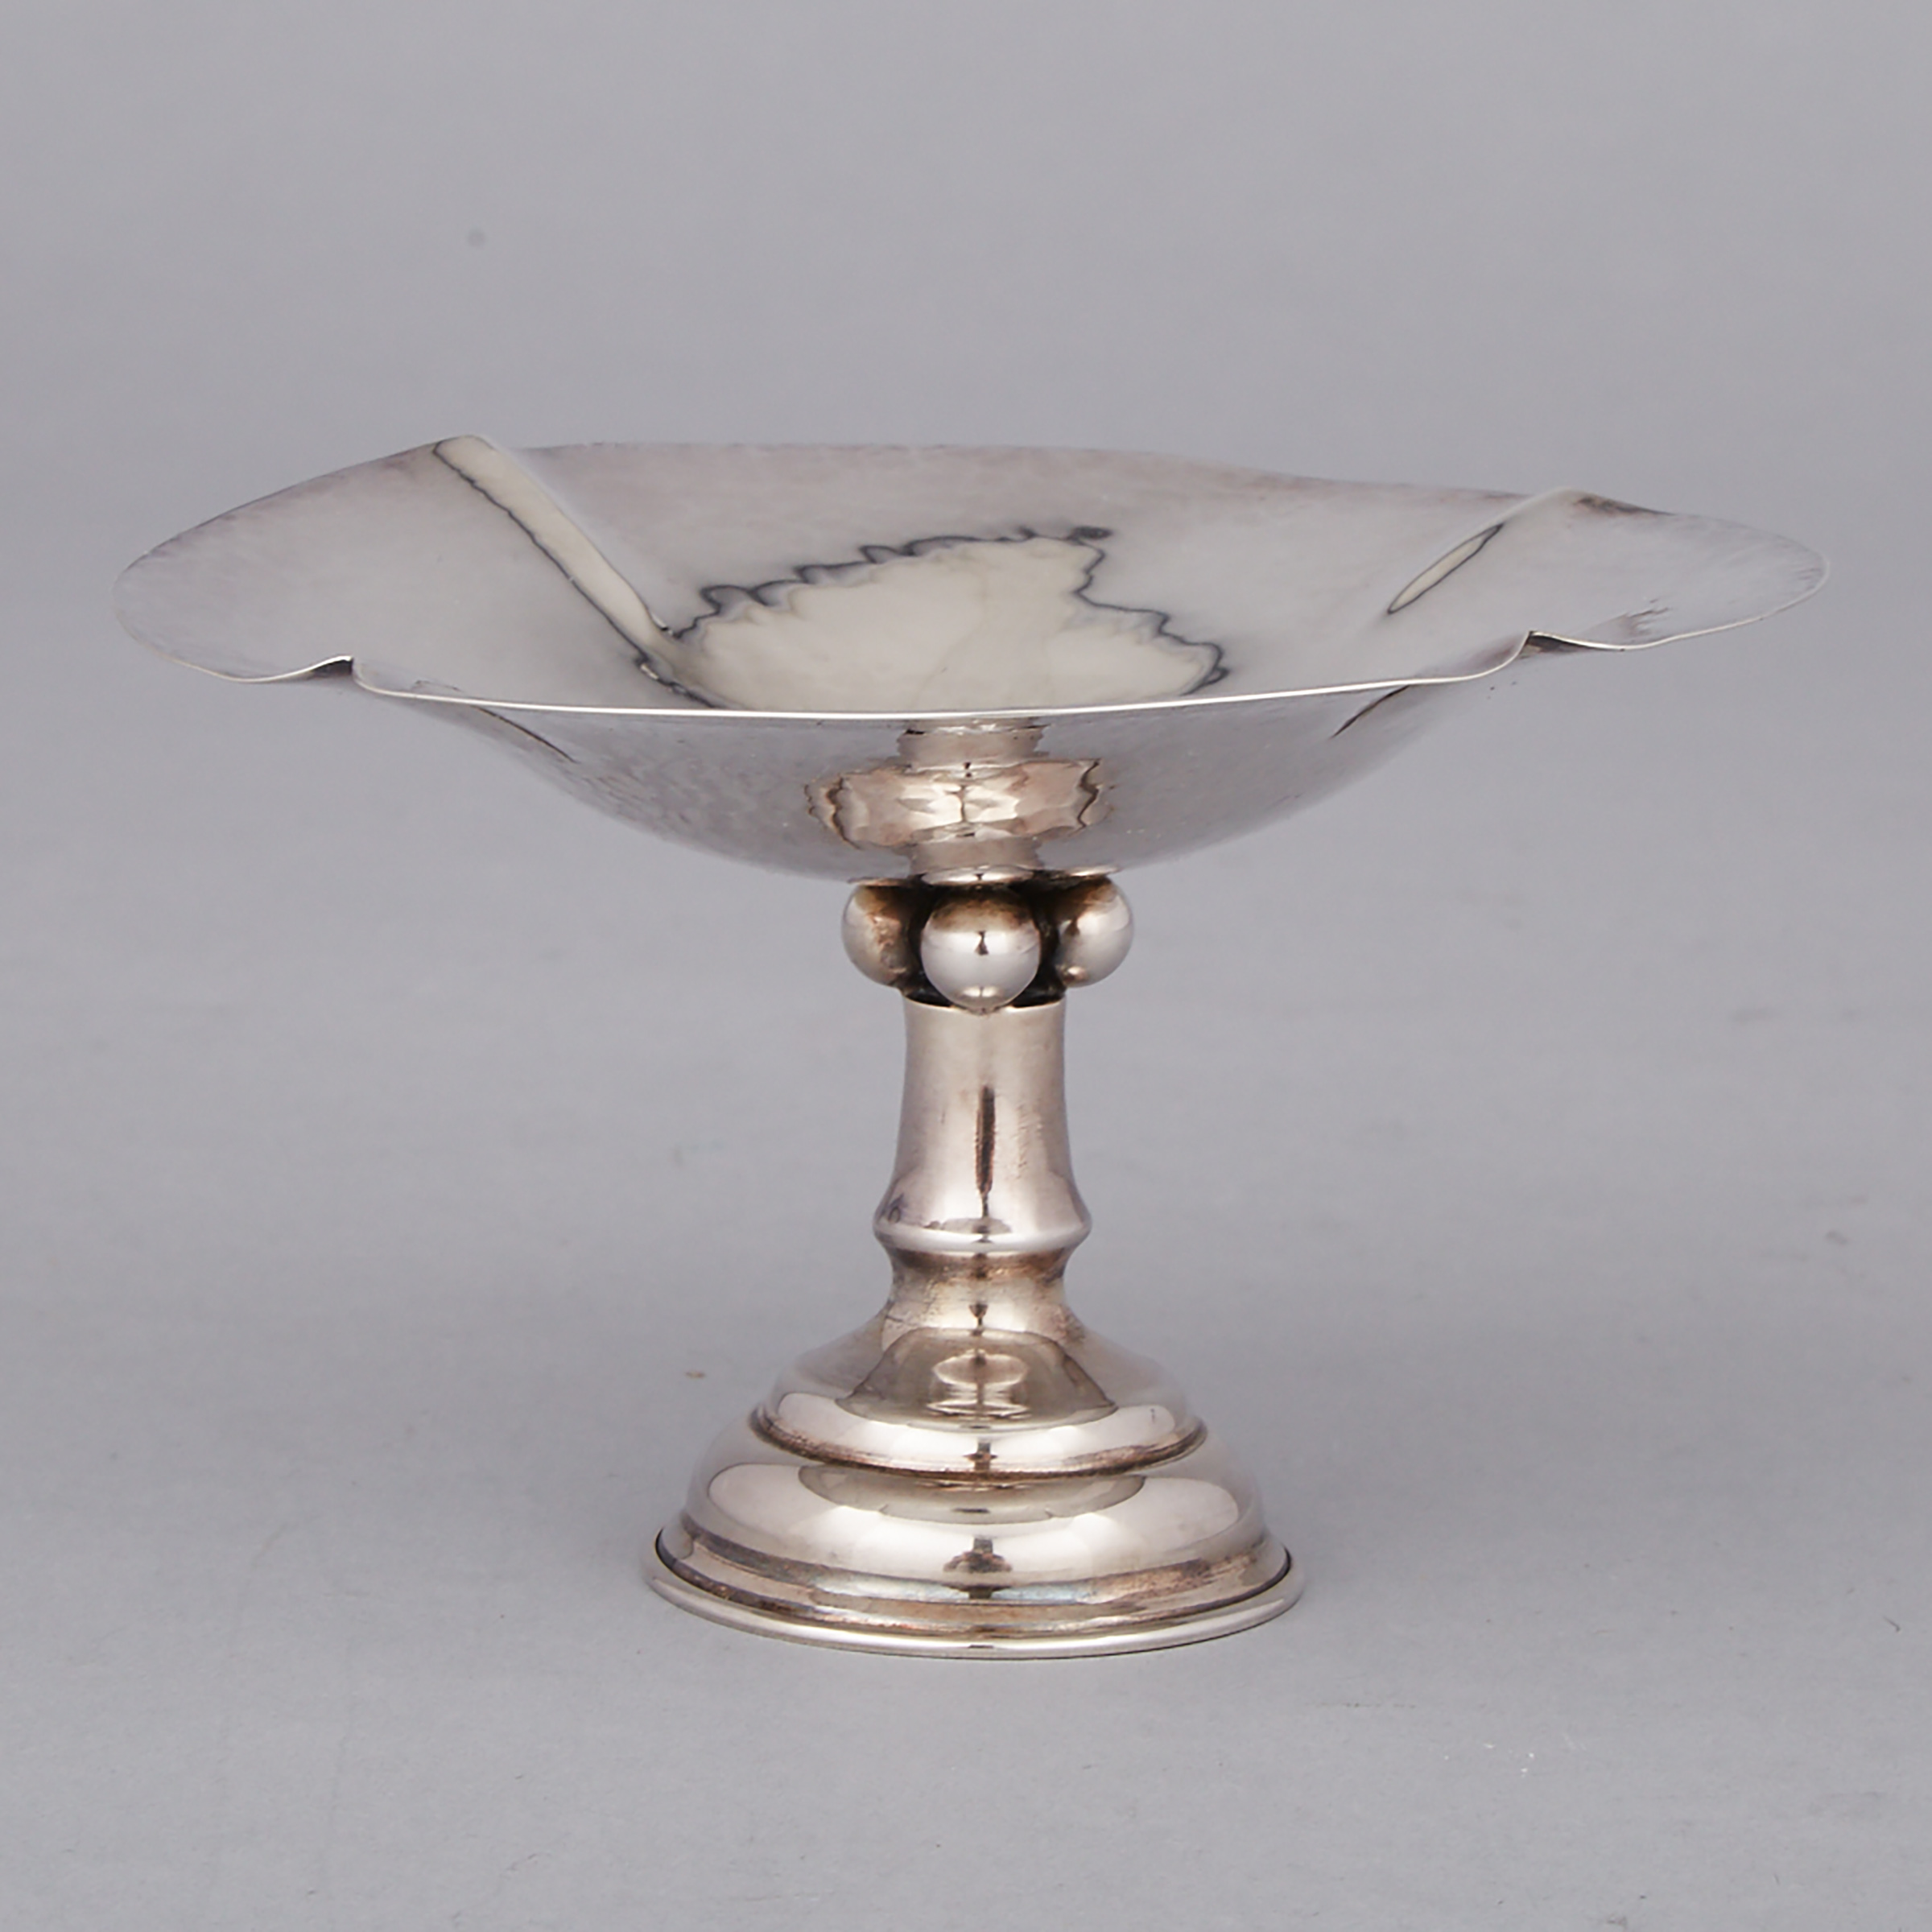 Canadian Silver Footed Comport, Carl Poul Petersen, Montreal, Que., mid-20th century